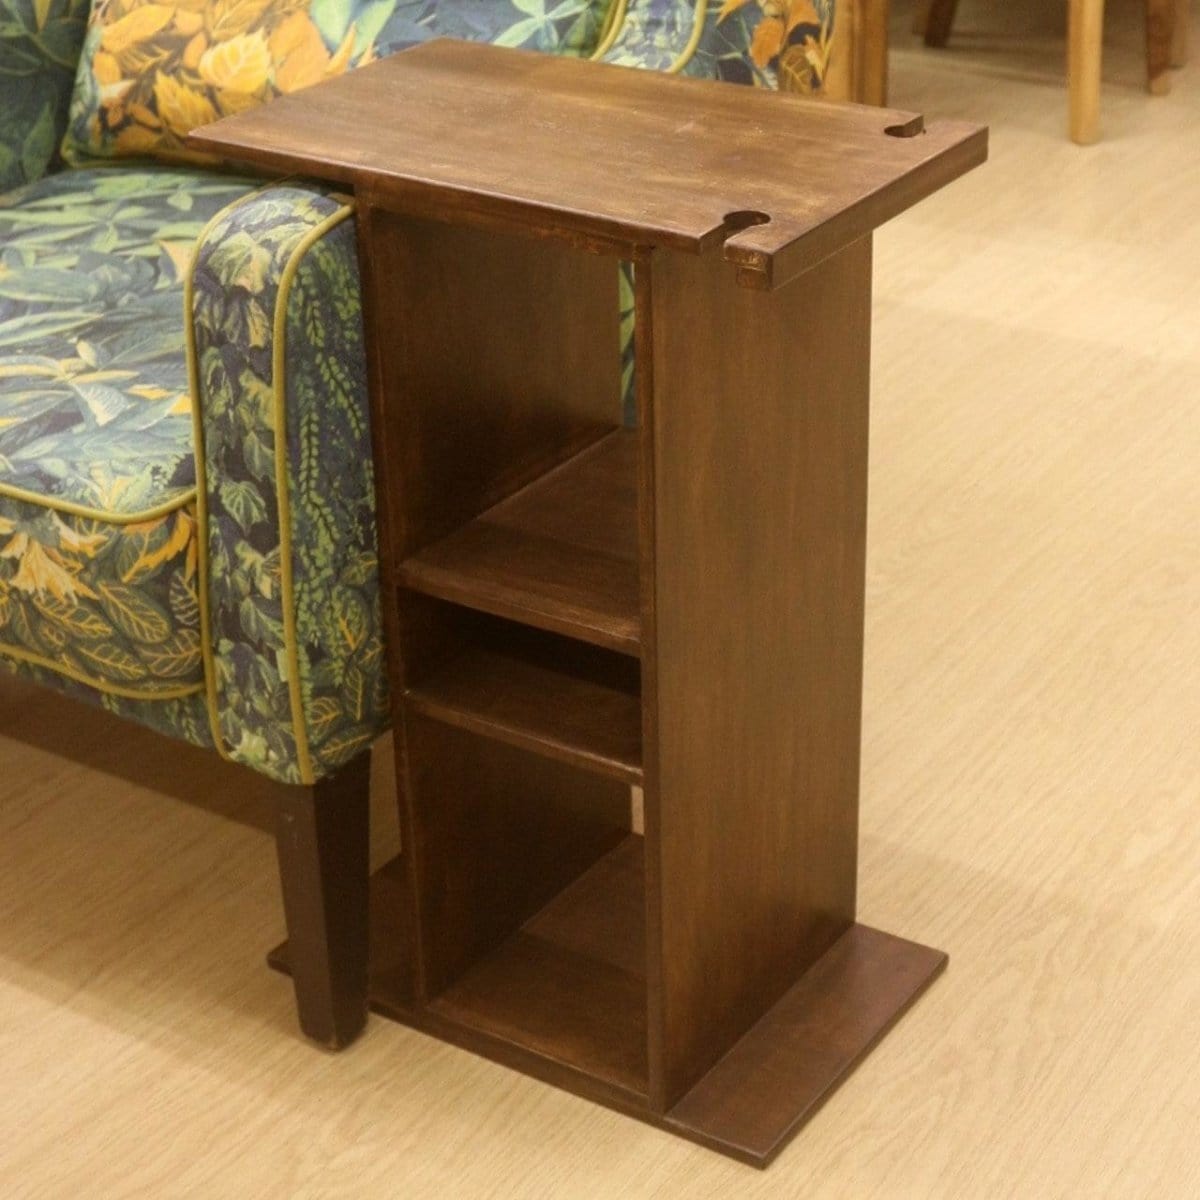 Barish Sofa Side Table Best Home Decor Handcrafted